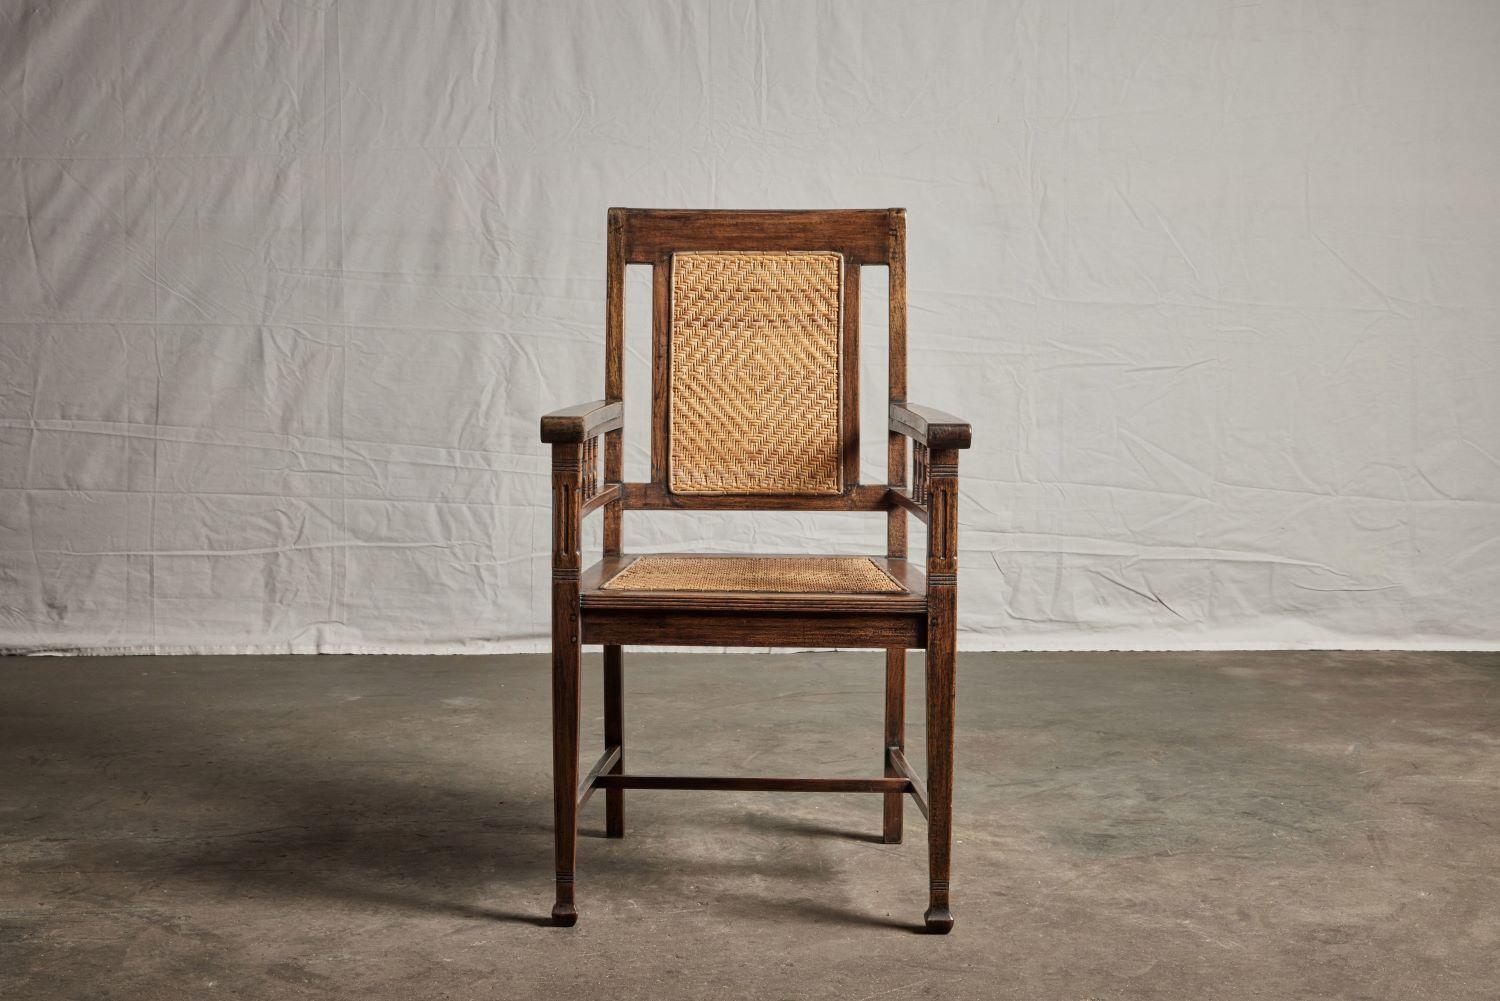 19th Century teak Armchair w/Cane Seat & Back. Made for the local Dutch in Indonesia. 
.